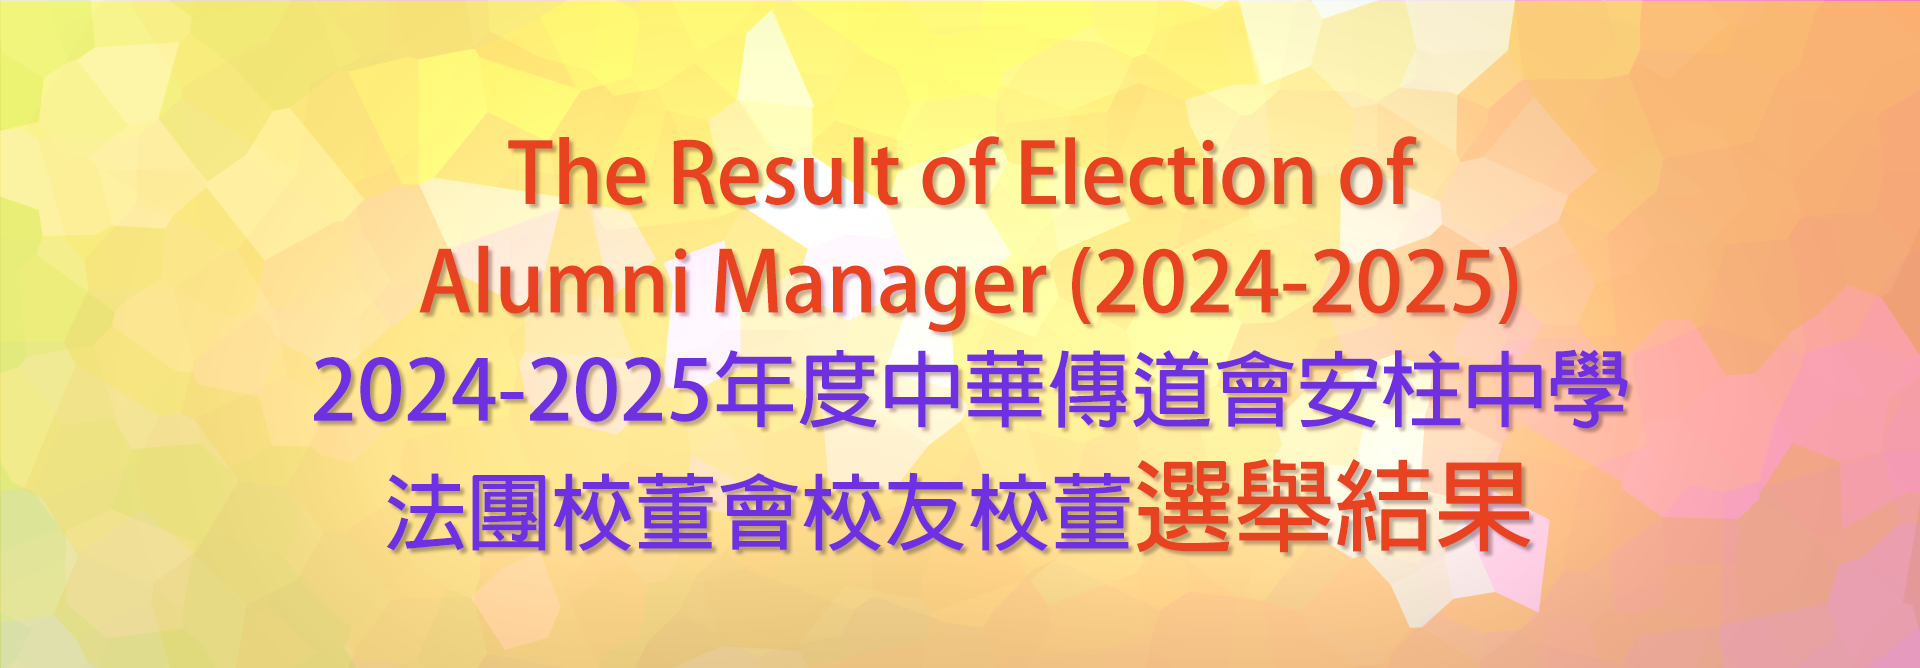 The Result of Election of Alumni Manager (2024-25)